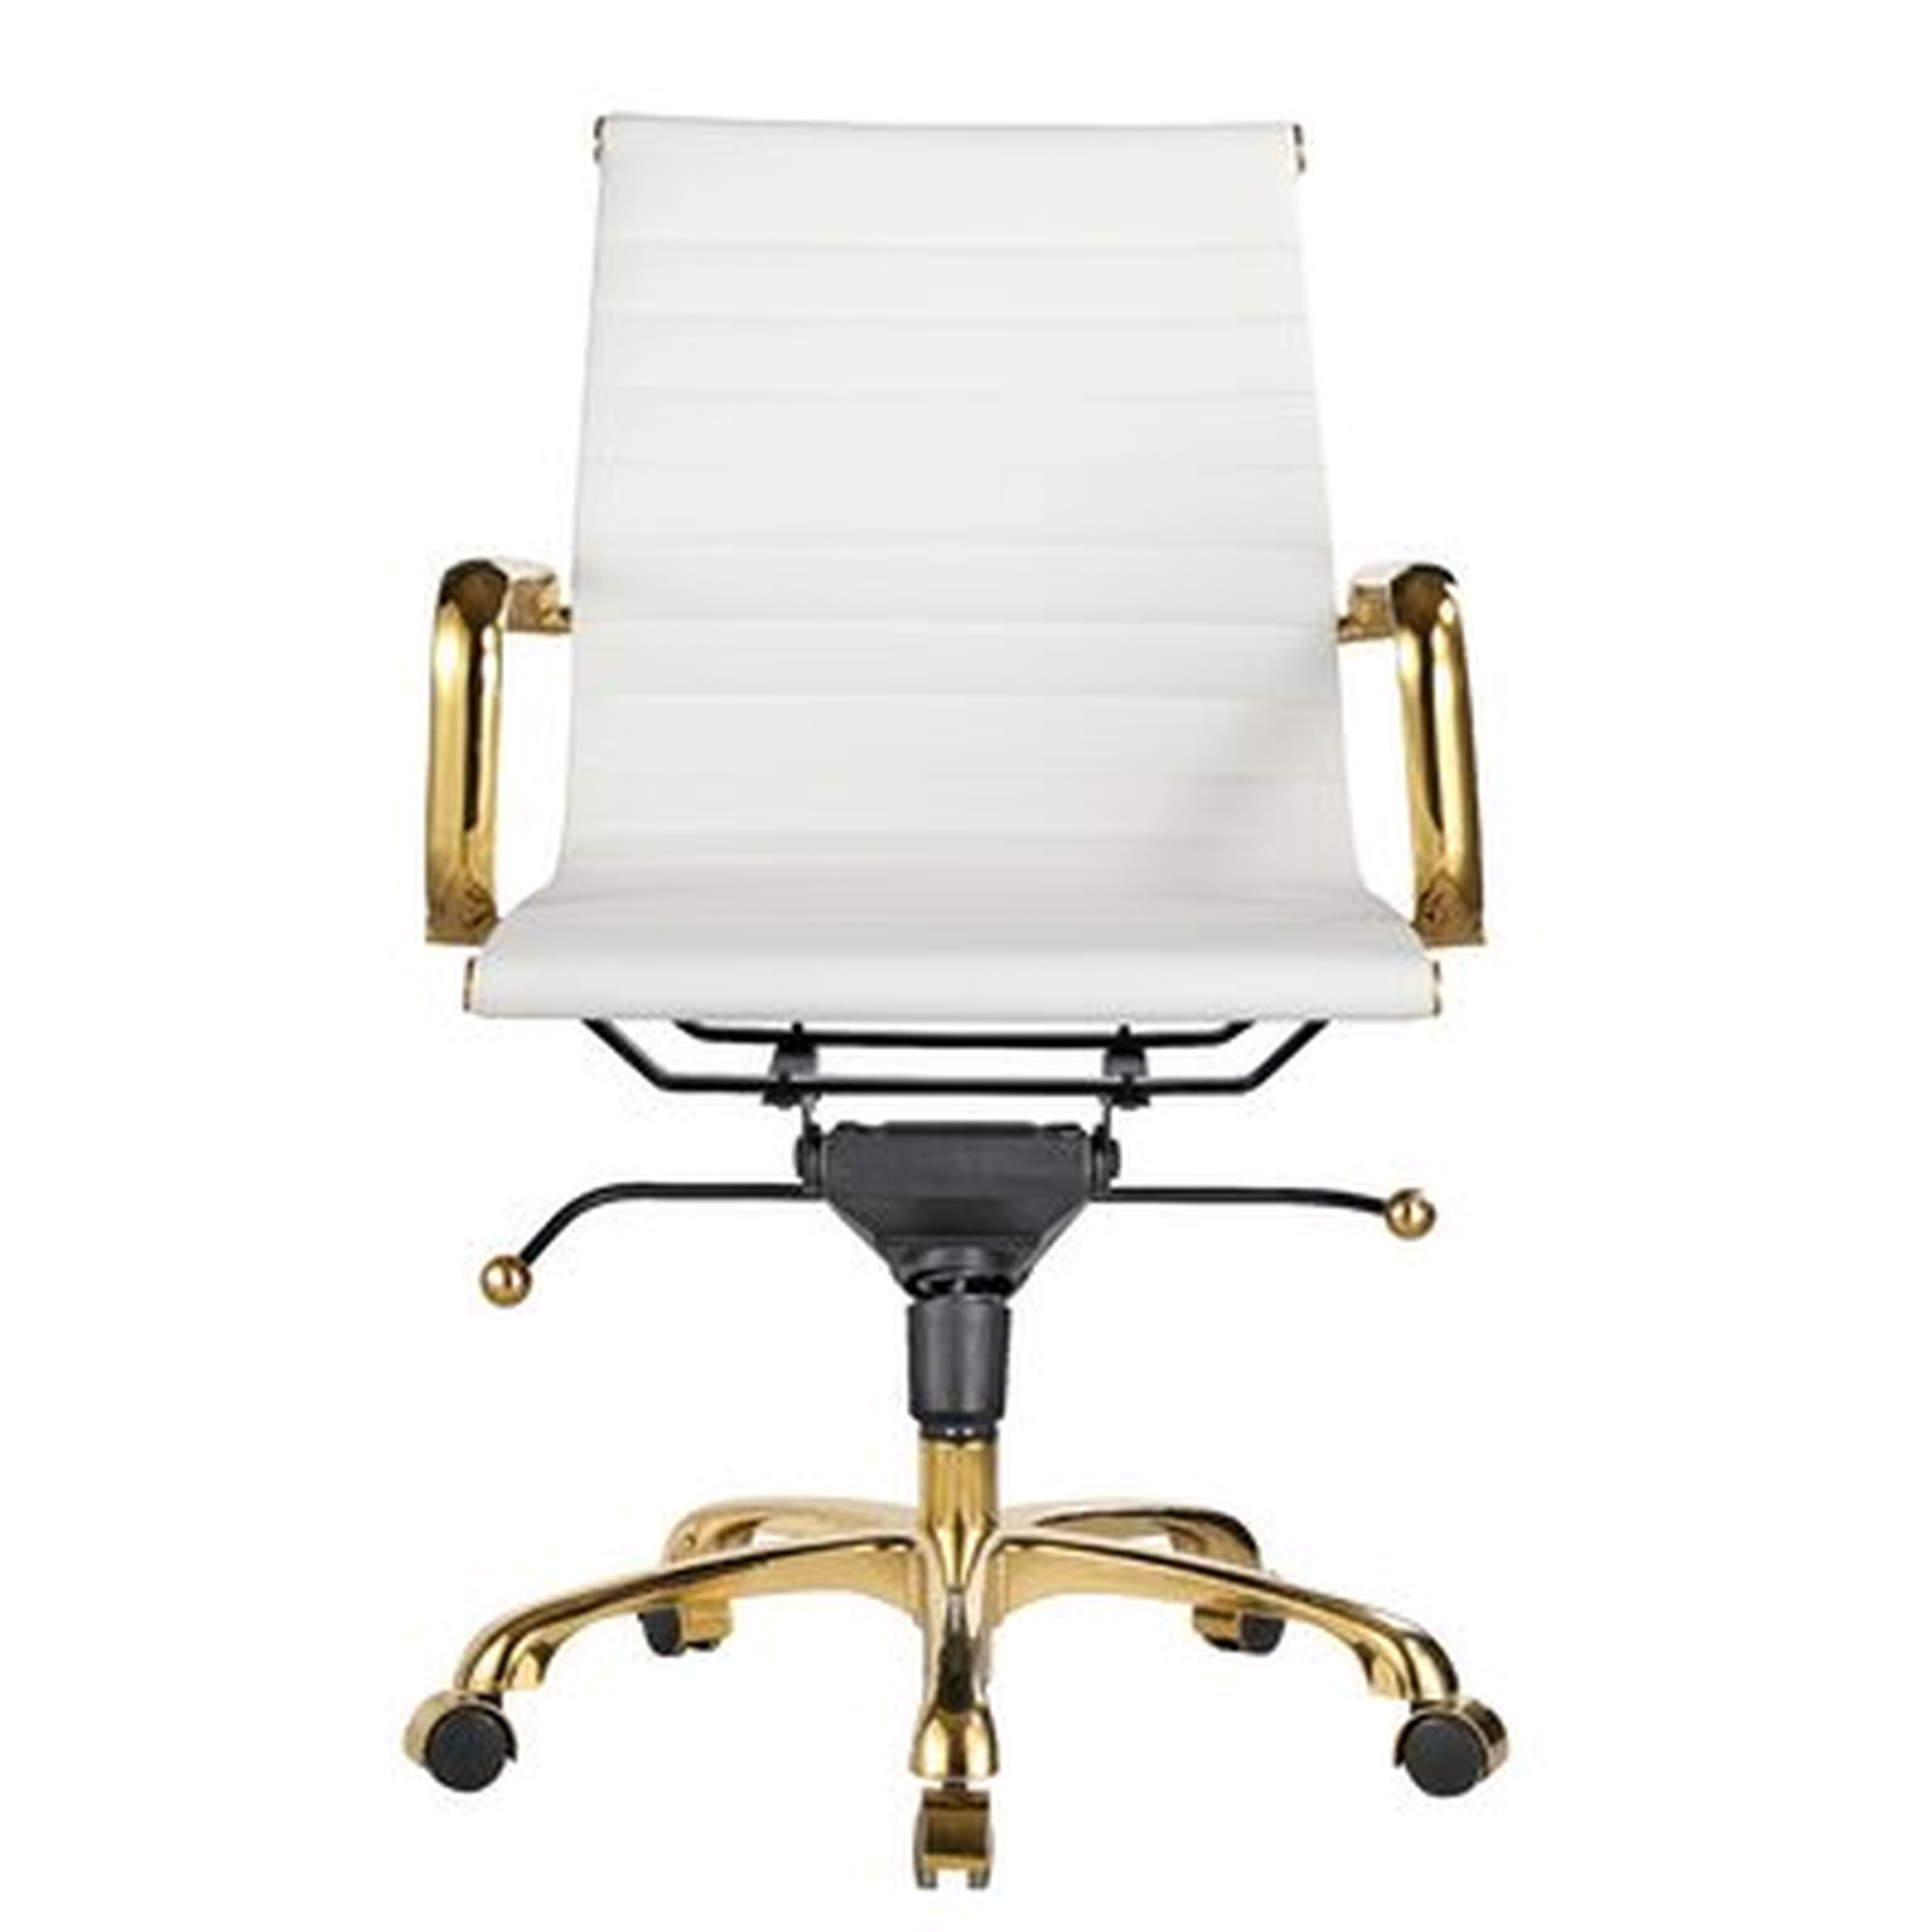 Frith Ergonomic Conference Chair - Wayfair